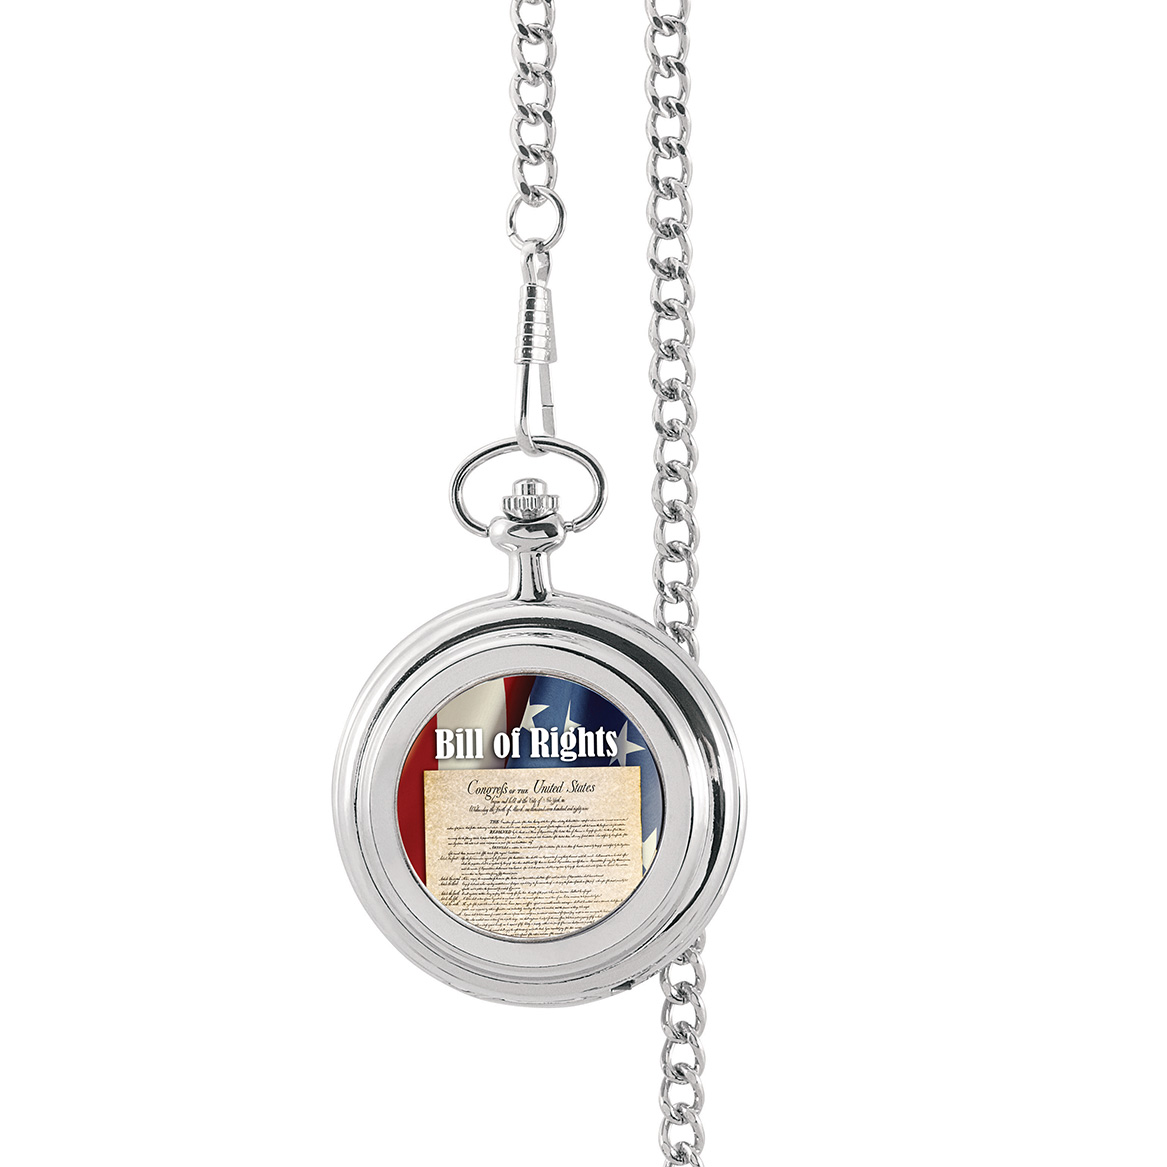 Picture of American Coin Treasures 16980 14 in. Bill of Rights Colorized Half Dollar Pocket Watch, Silver